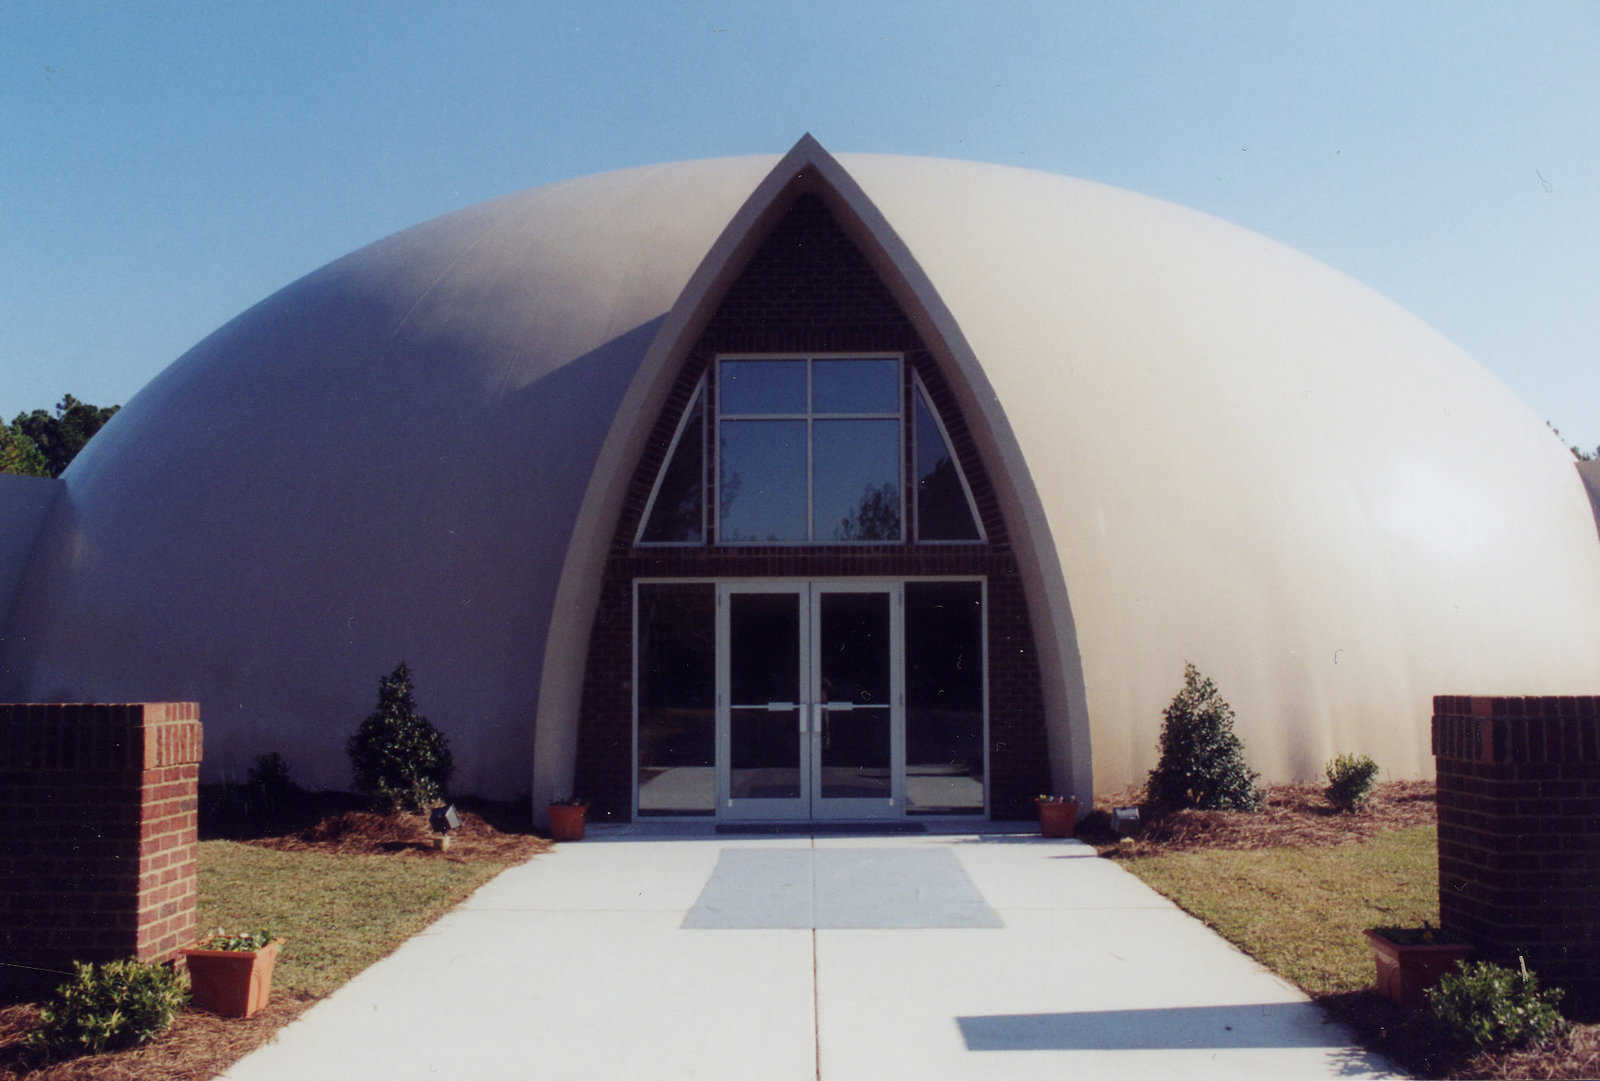 Featured Monolithic Dome Churches | Monolithic.org